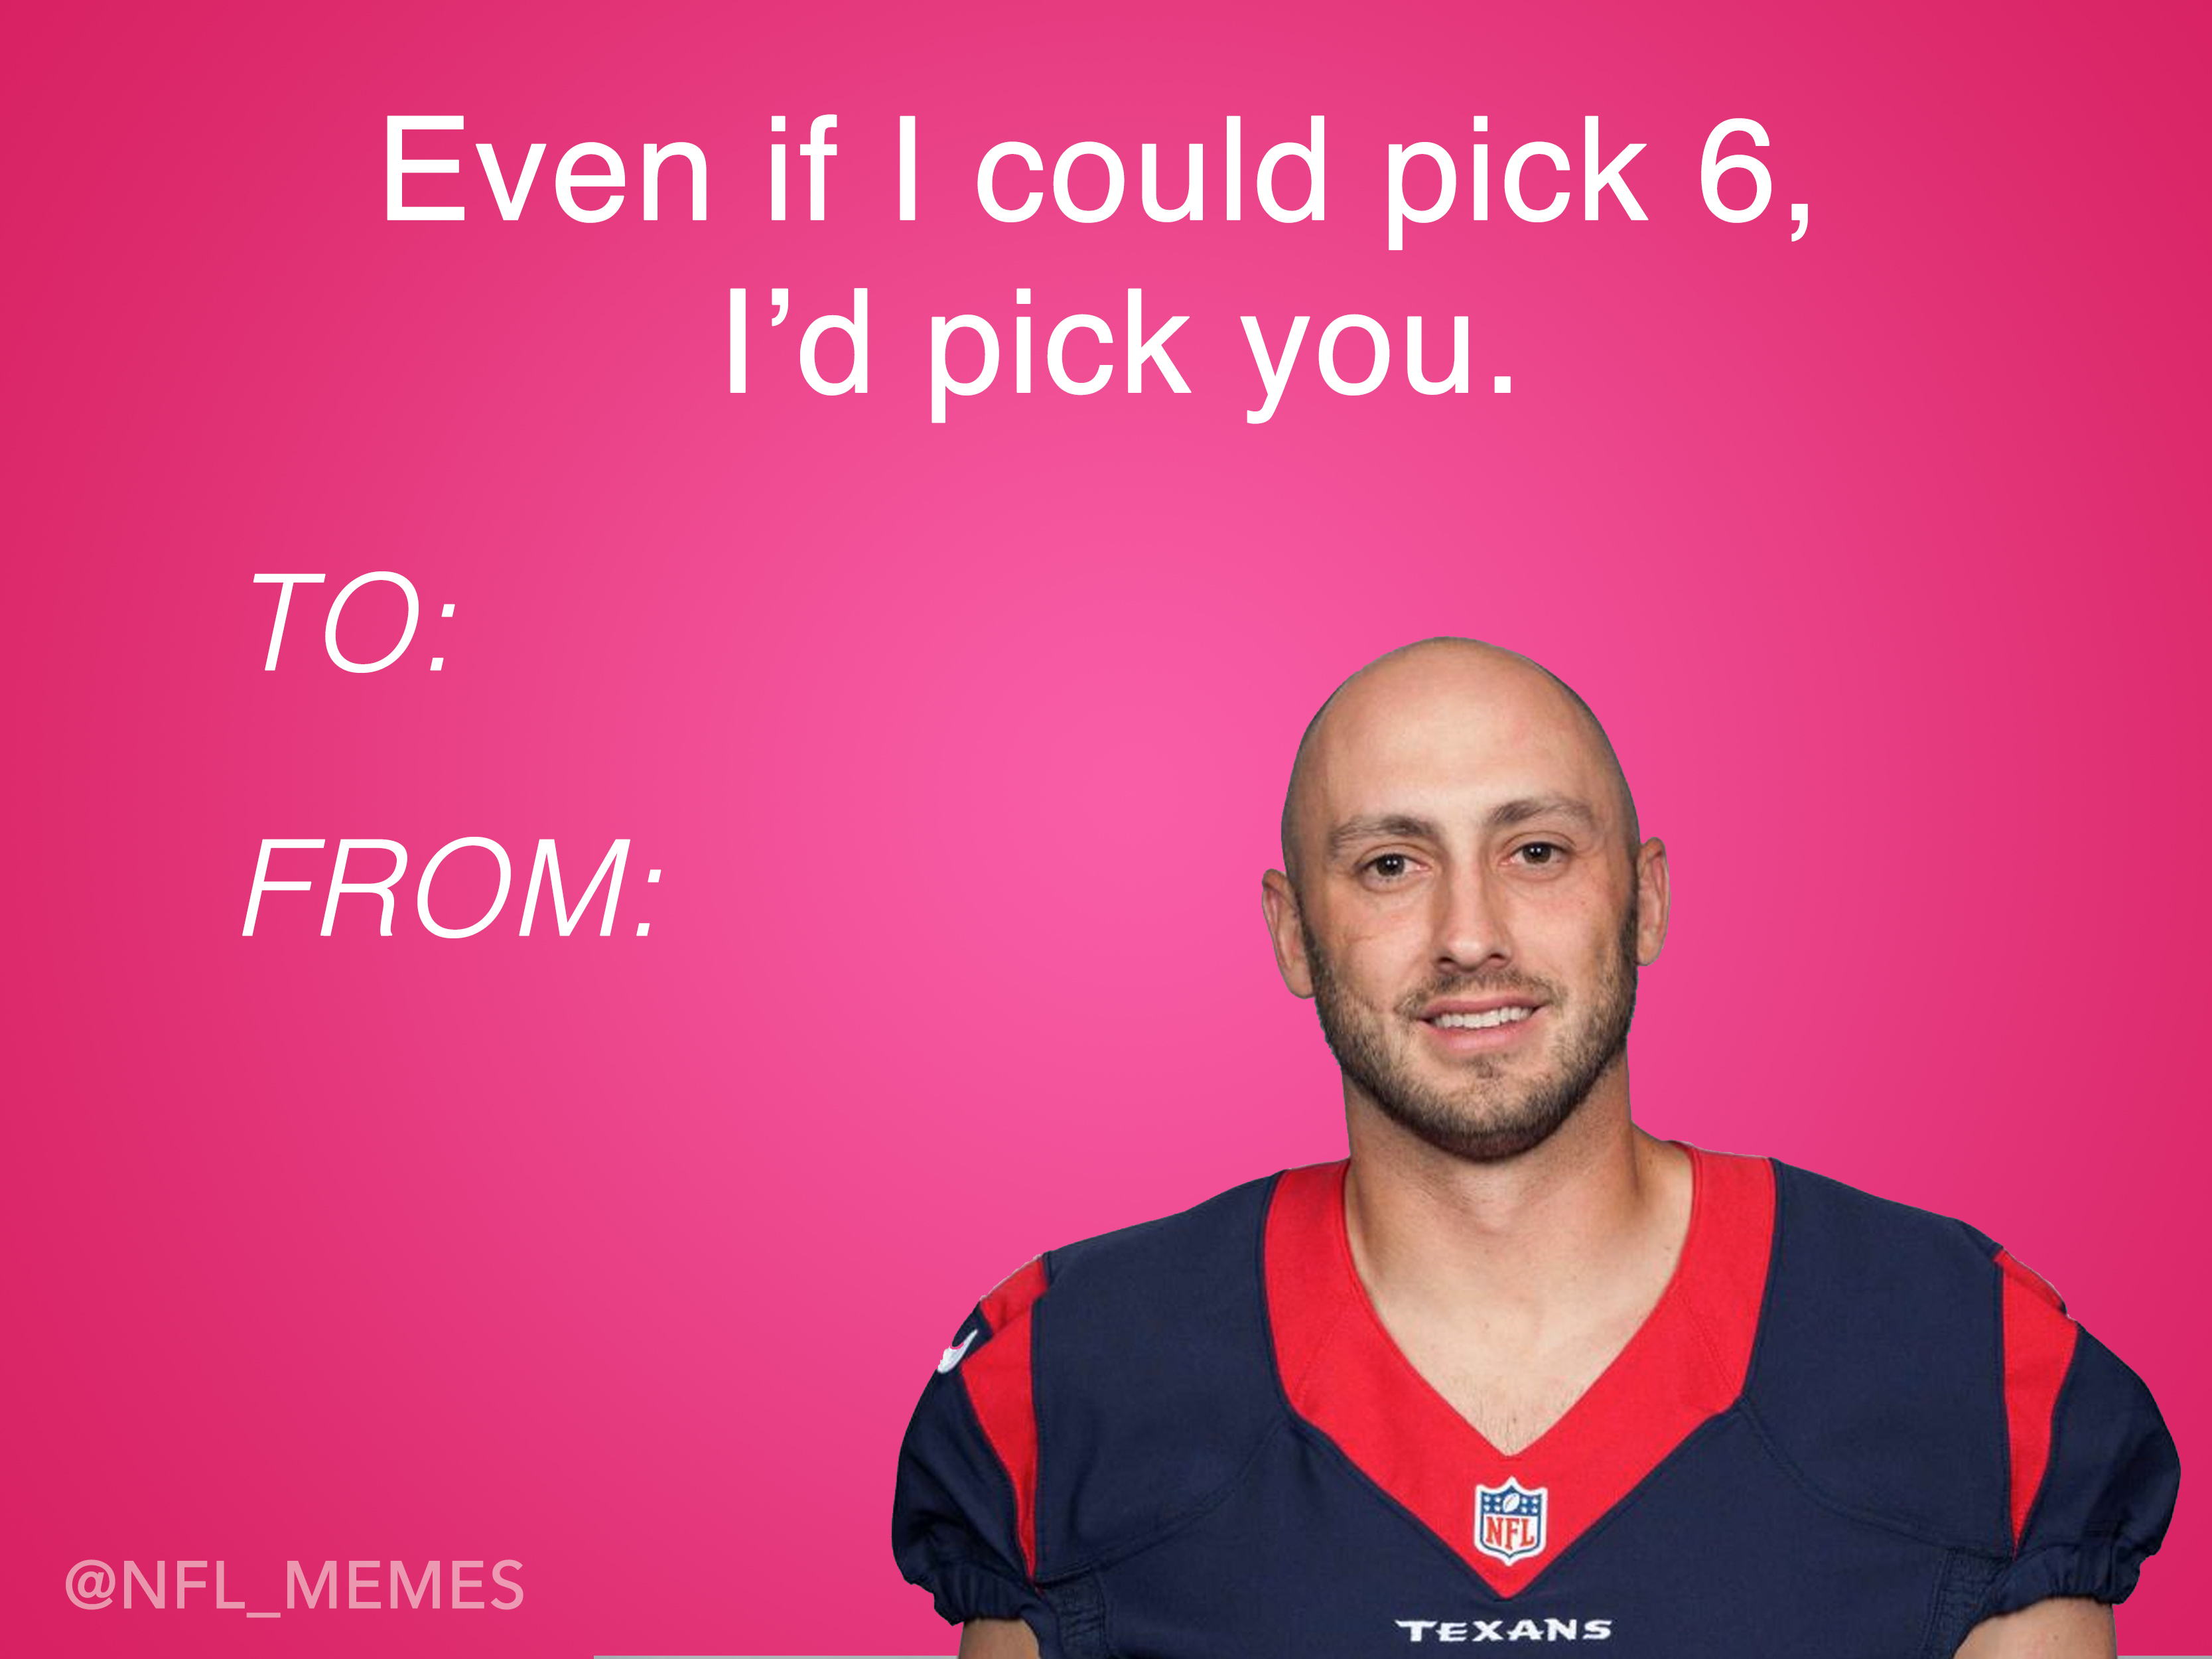 This Year's Batch Of NFL Themed Valentines Day Cards - Daily Snark